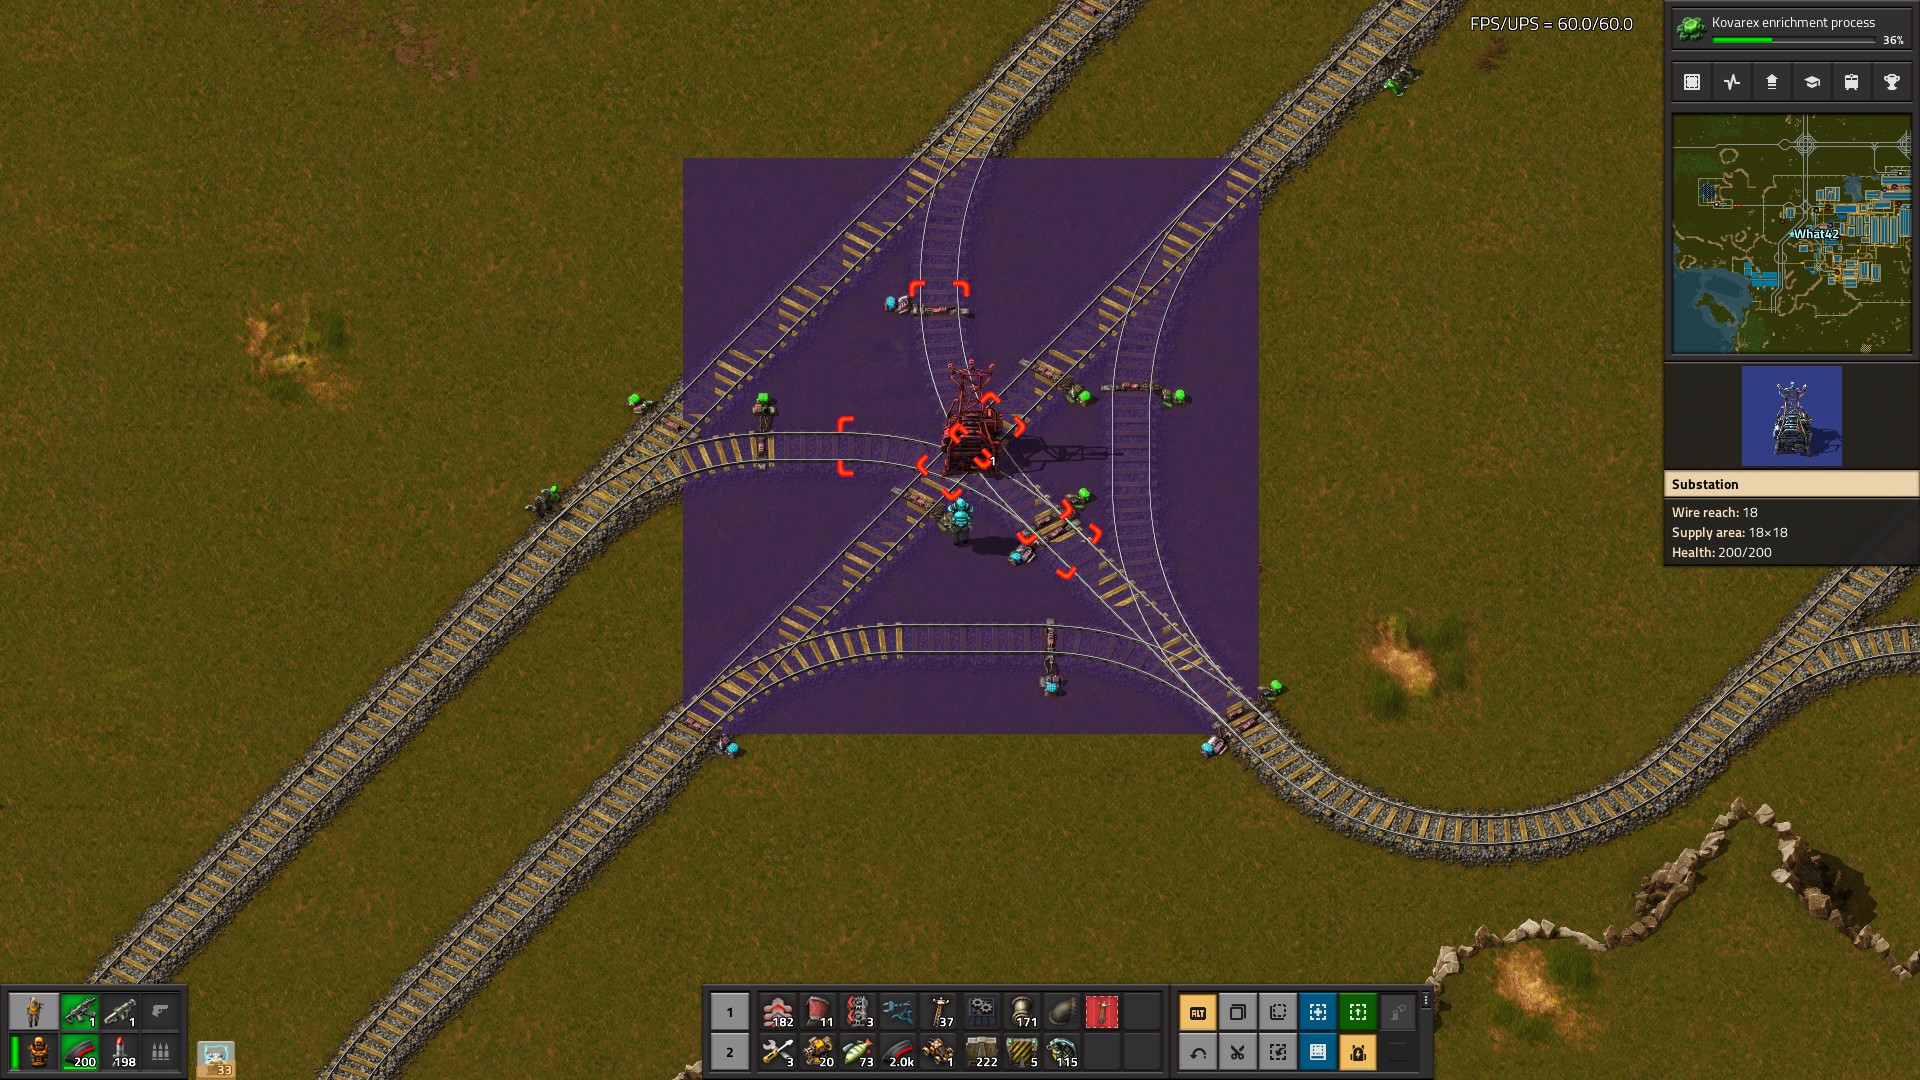 (modded) area indicator doesn't cover all tracks